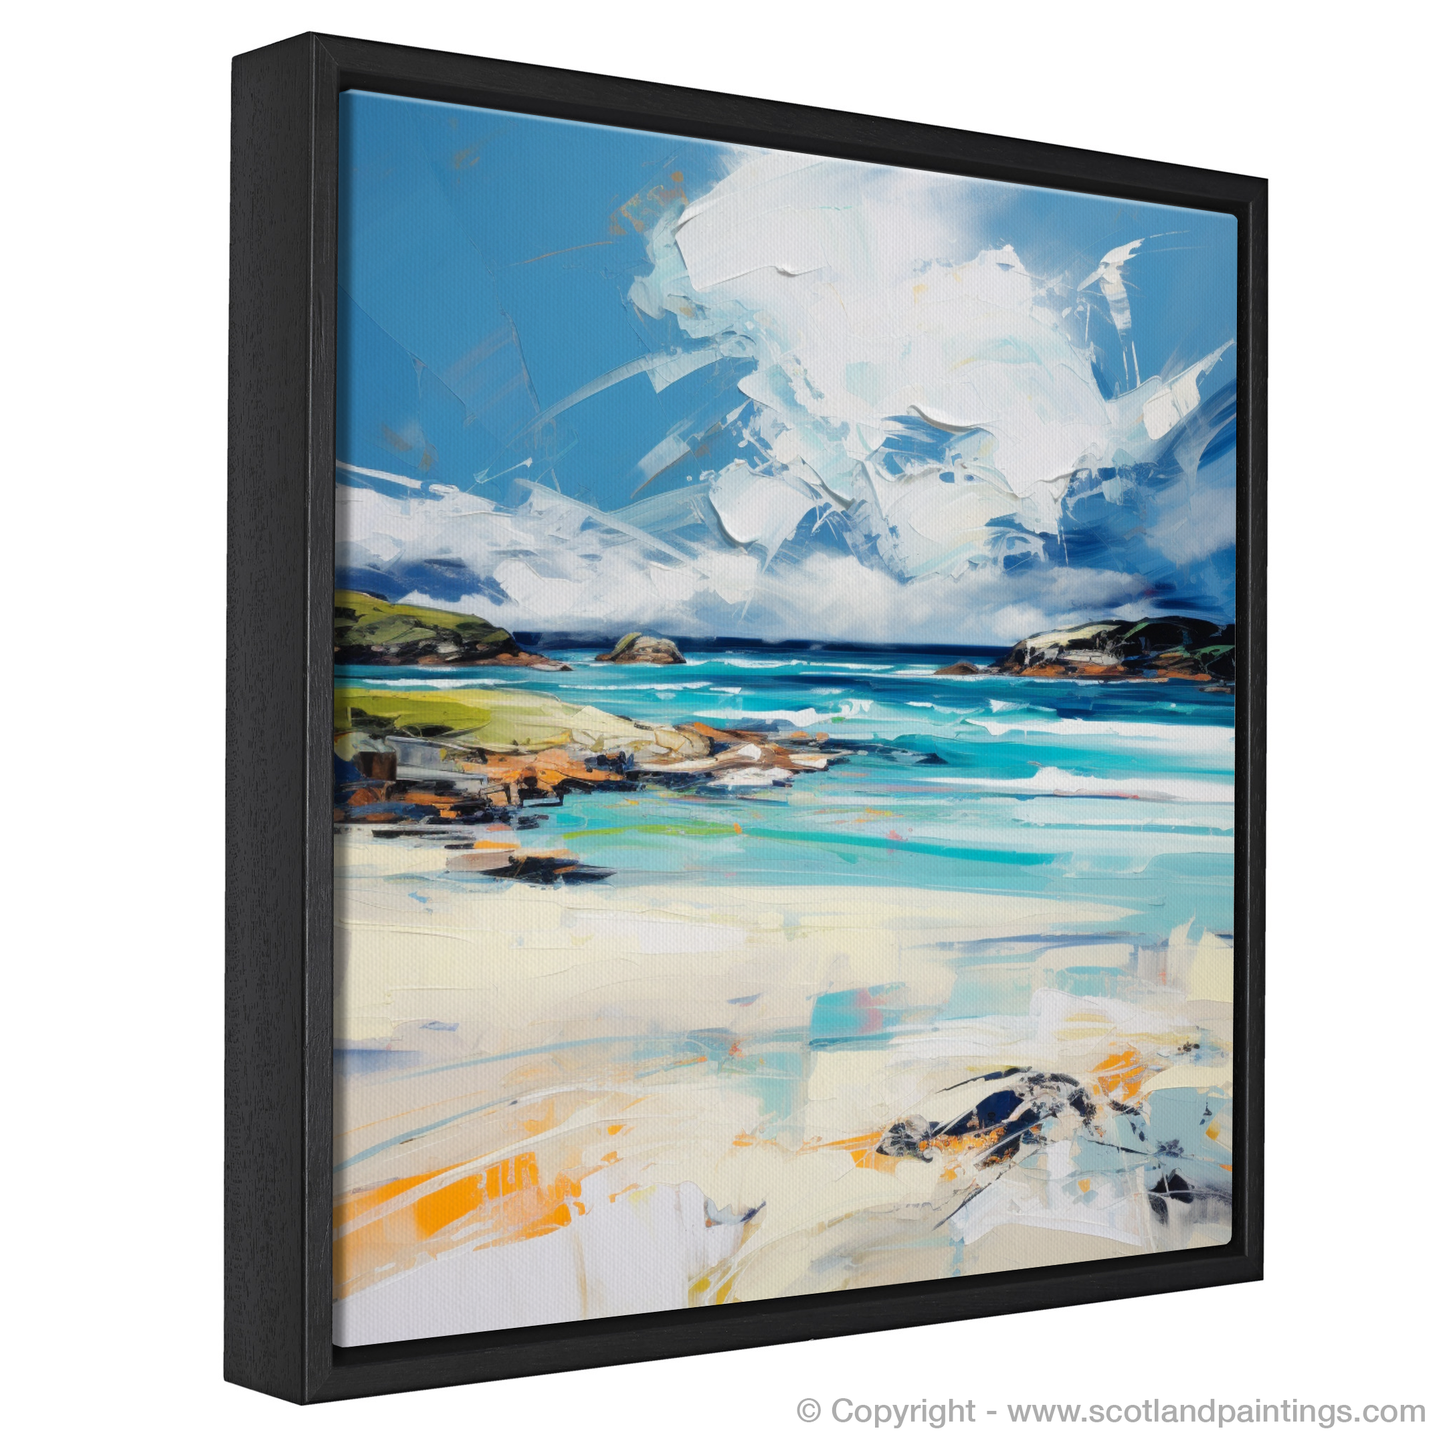 Painting and Art Print of Camusdarach Beach entitled "Expressionist Ode to Camusdarach Beach".